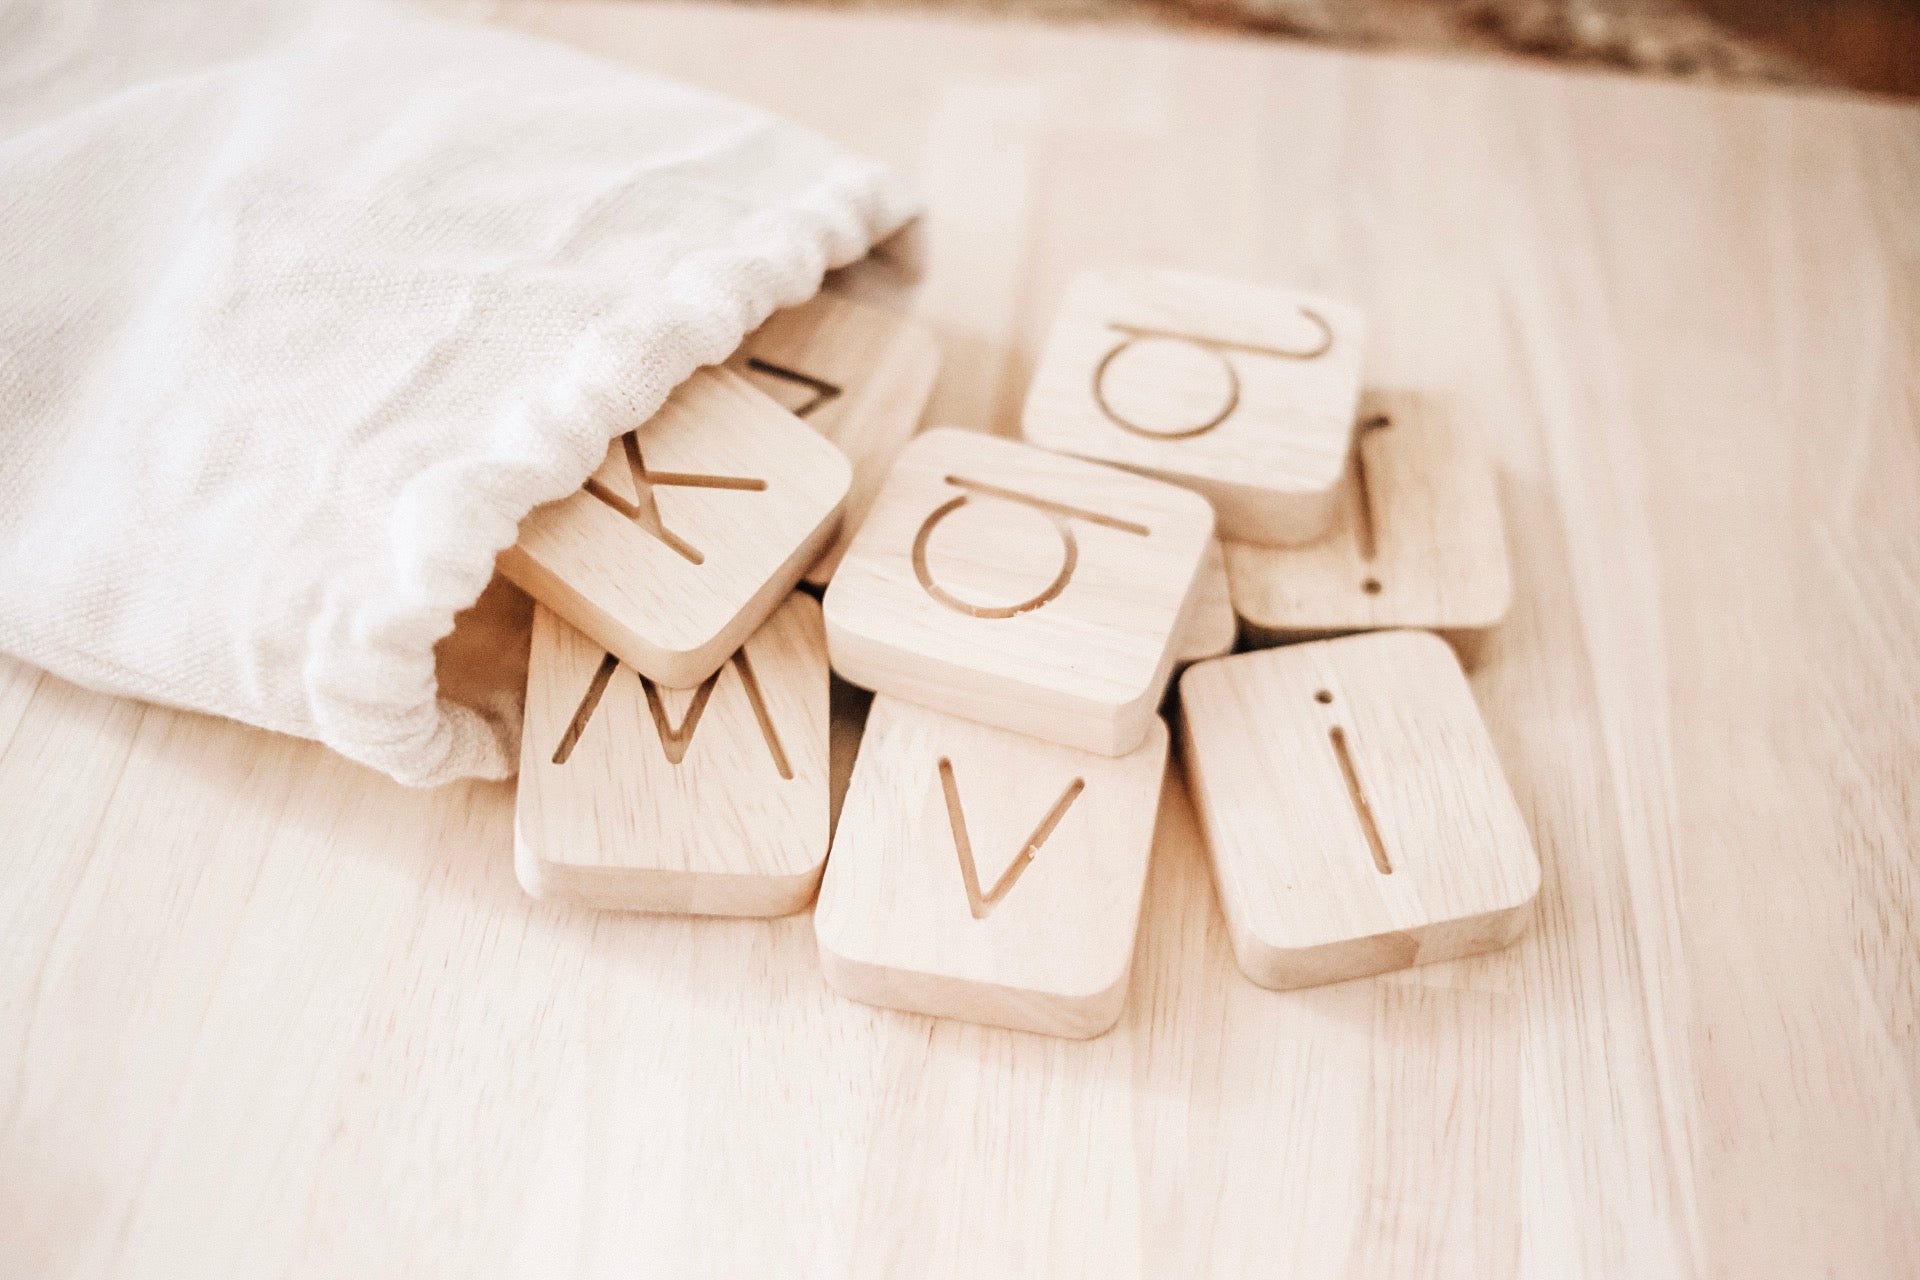 Wooden Letters - Word Building Kit